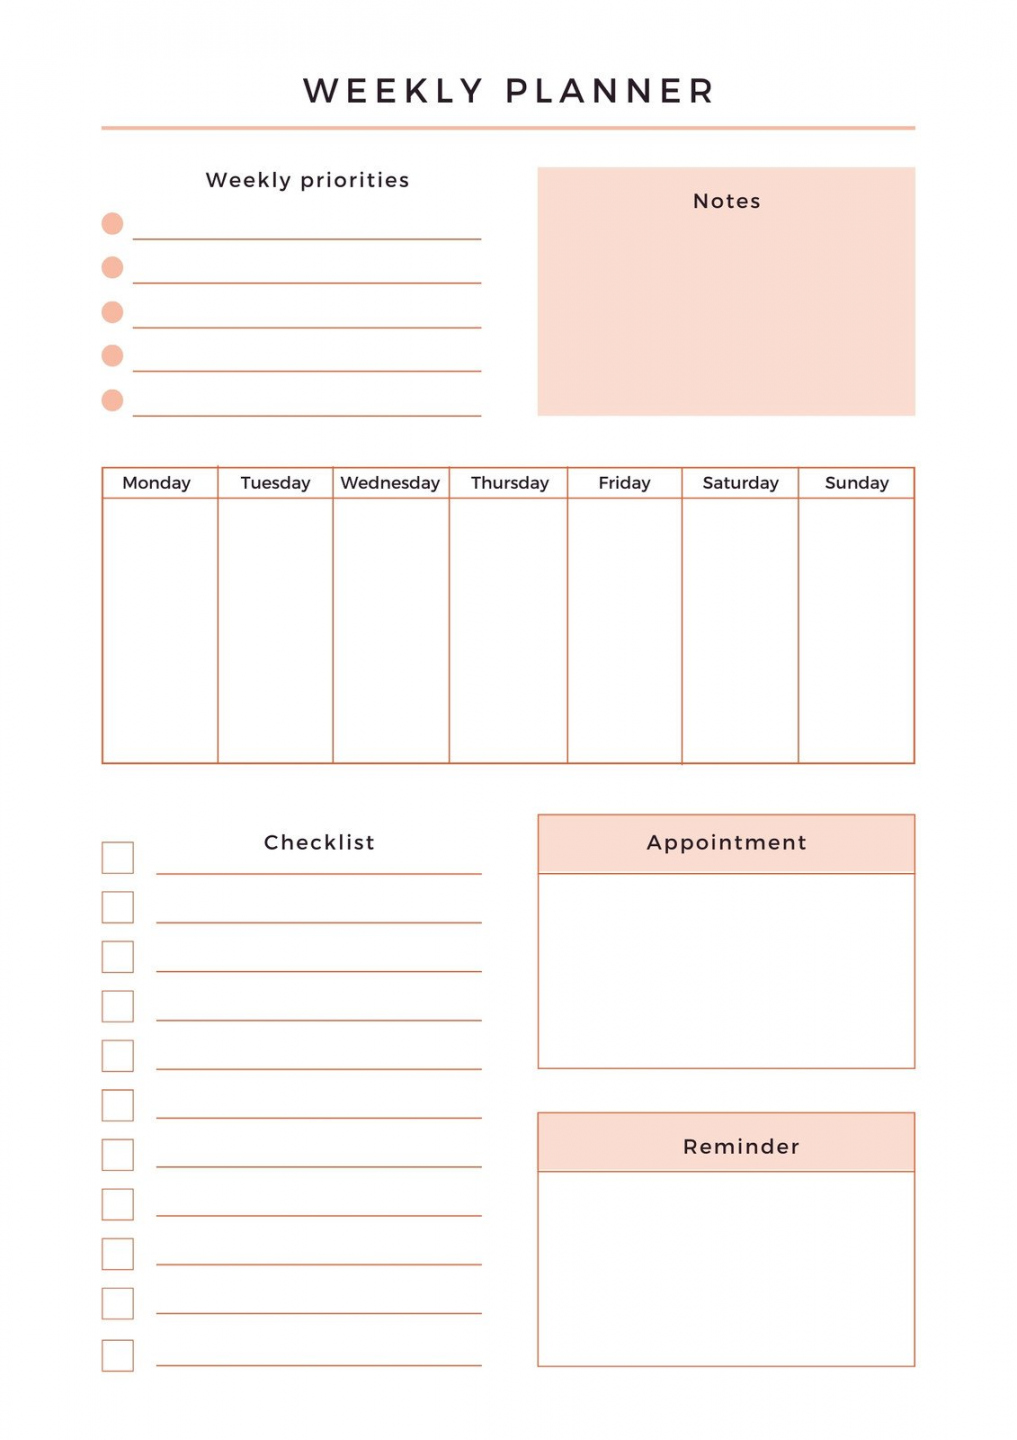 Free and customizable weekly planner templates  Canva